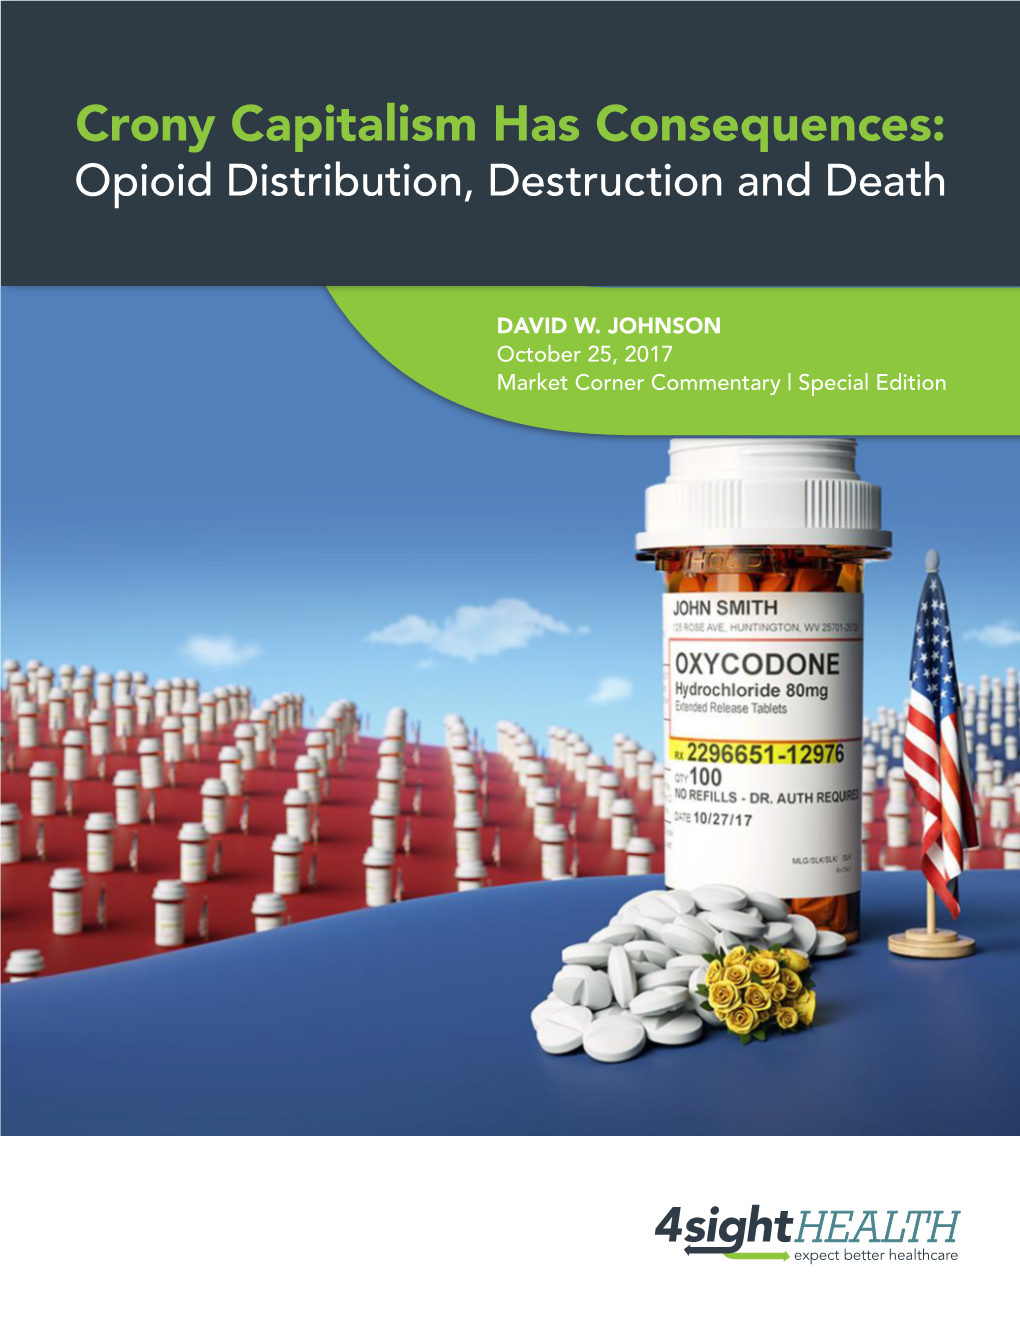 Crony Capitalism Has Consequences: Opioid Distribution, Destruction and Death